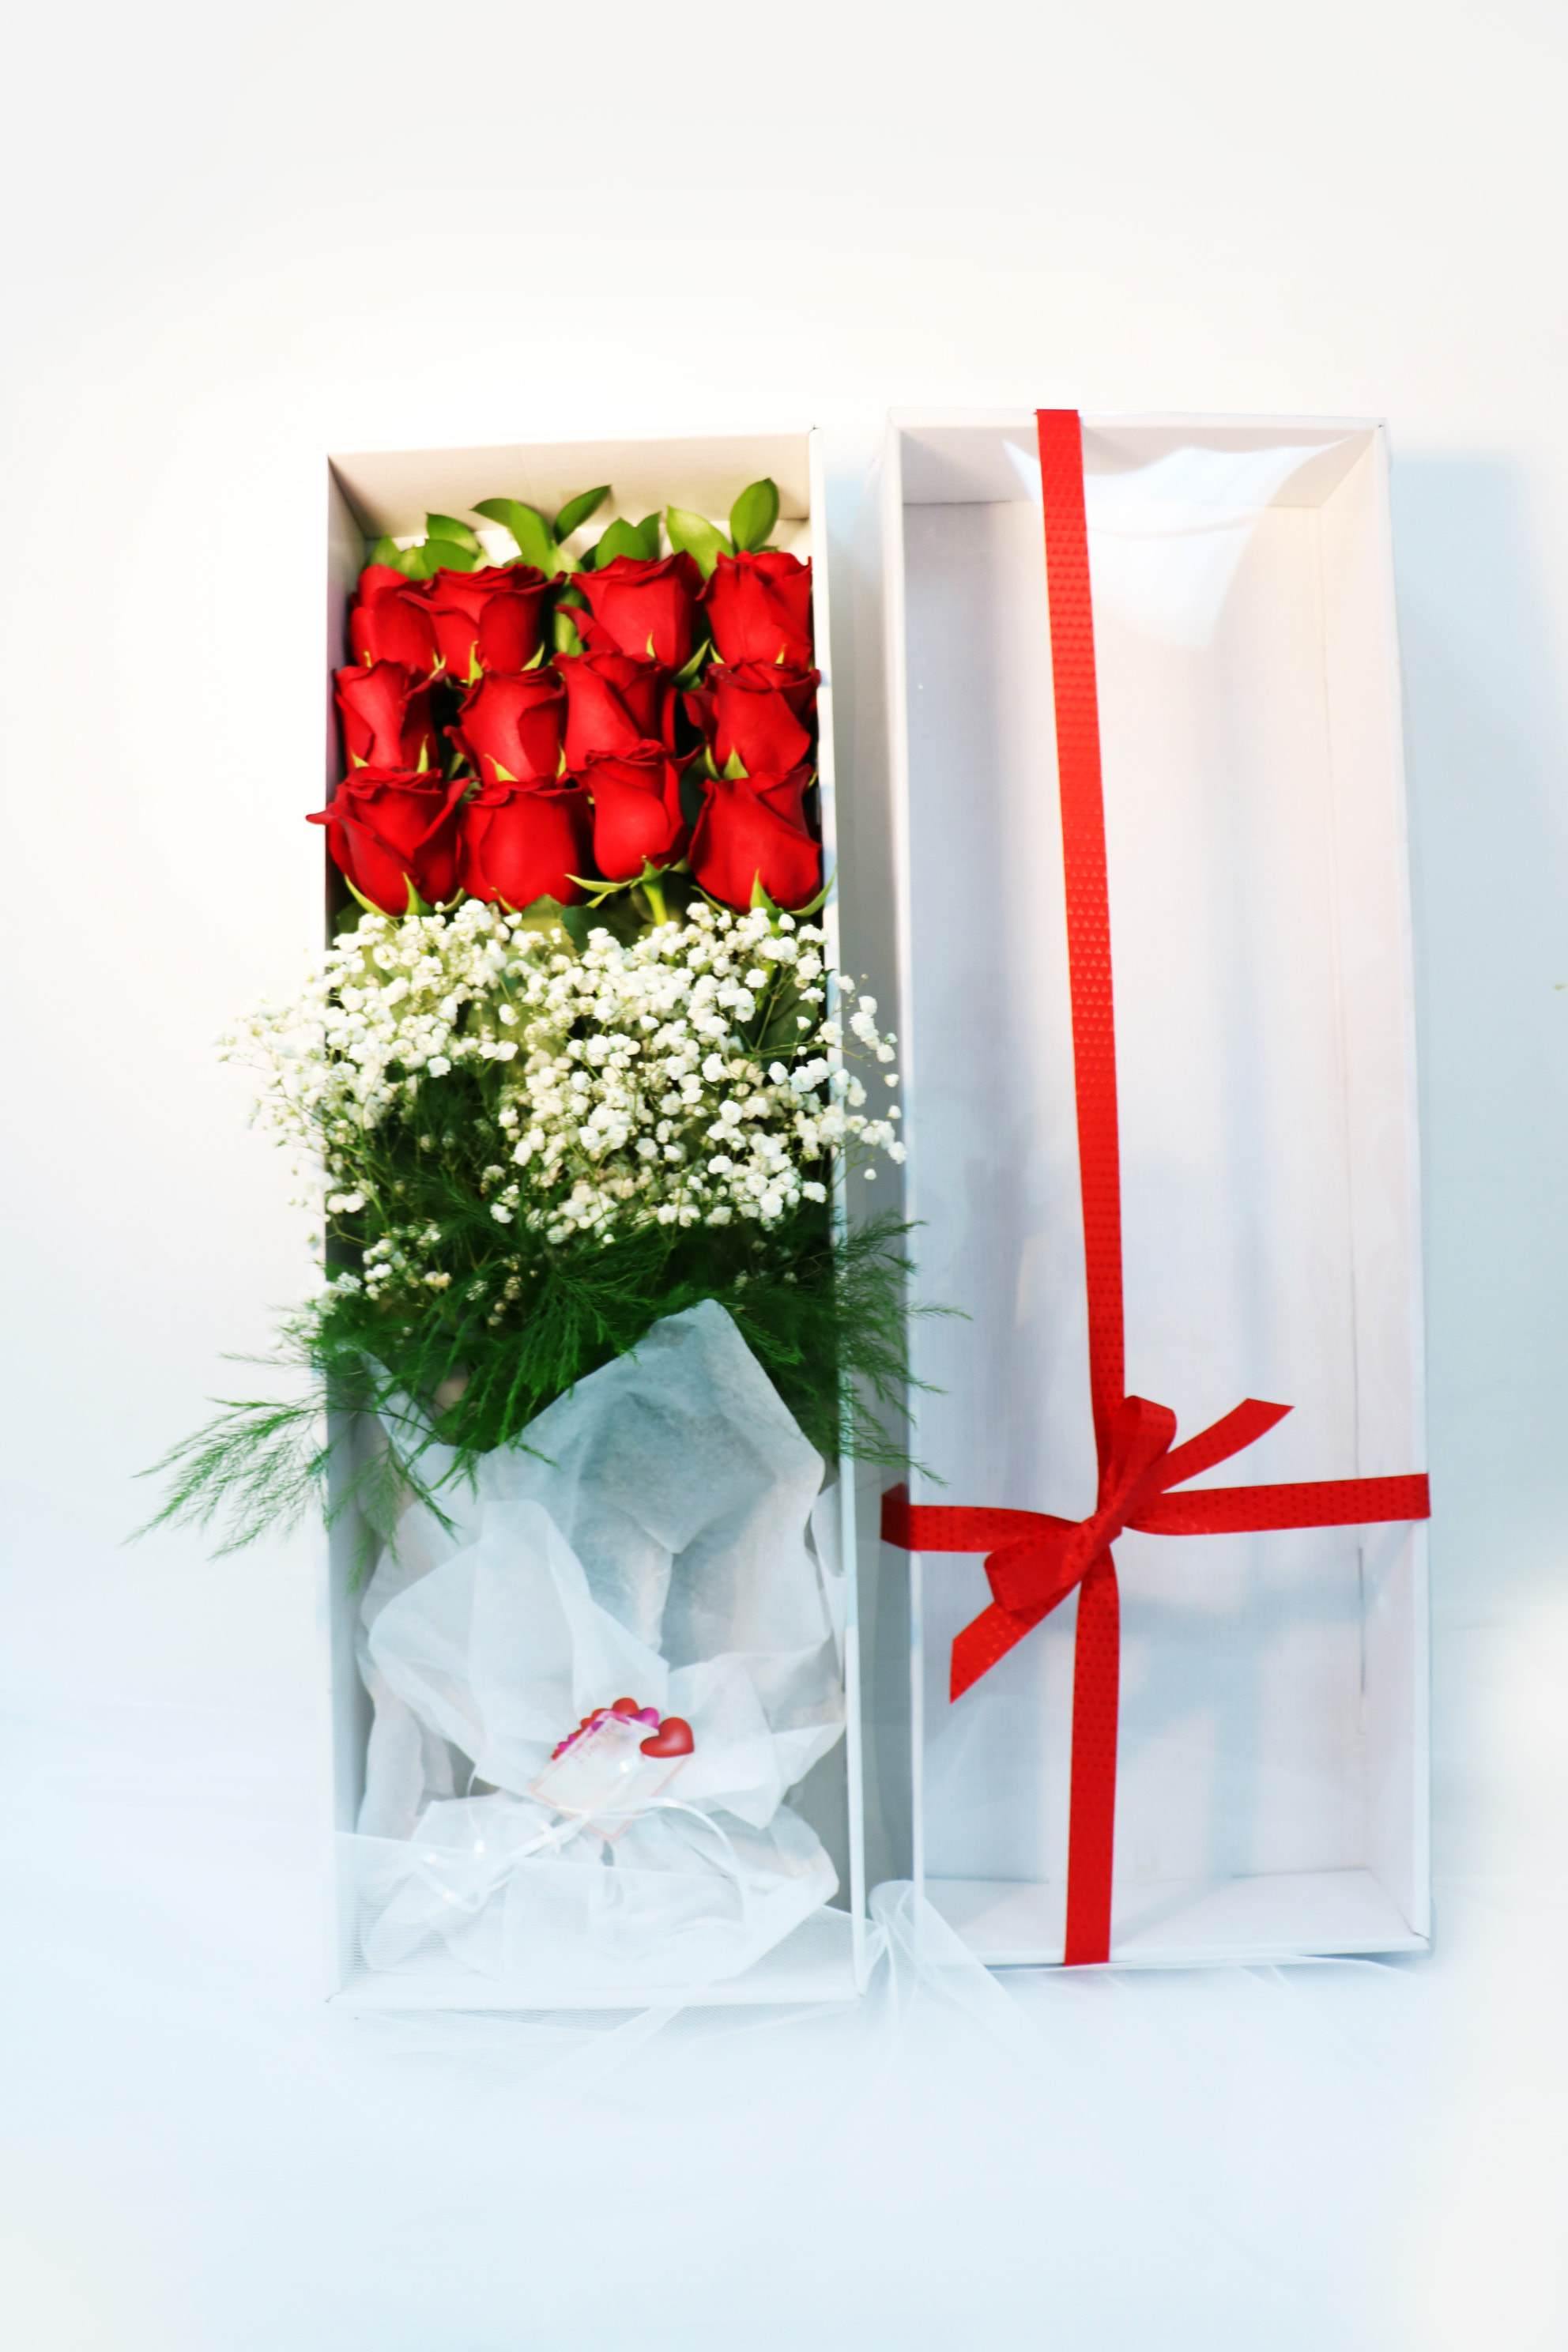 12 Red Roses & Baby's Breath In A Box - Toronto Flower Gallery